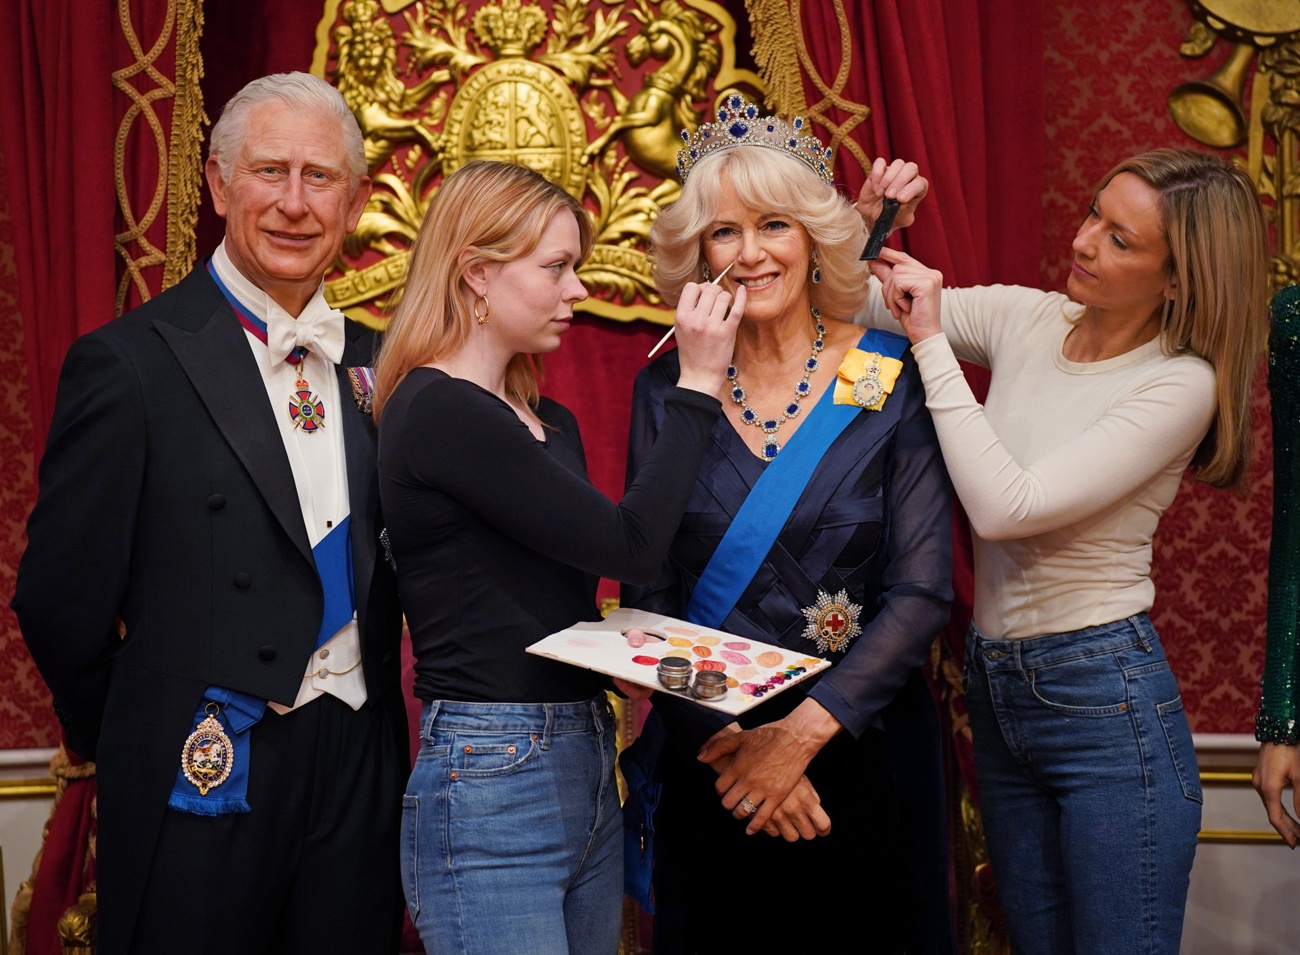 Discover the new wax figure of Camilla at the famous Madame Tussauds museum in London